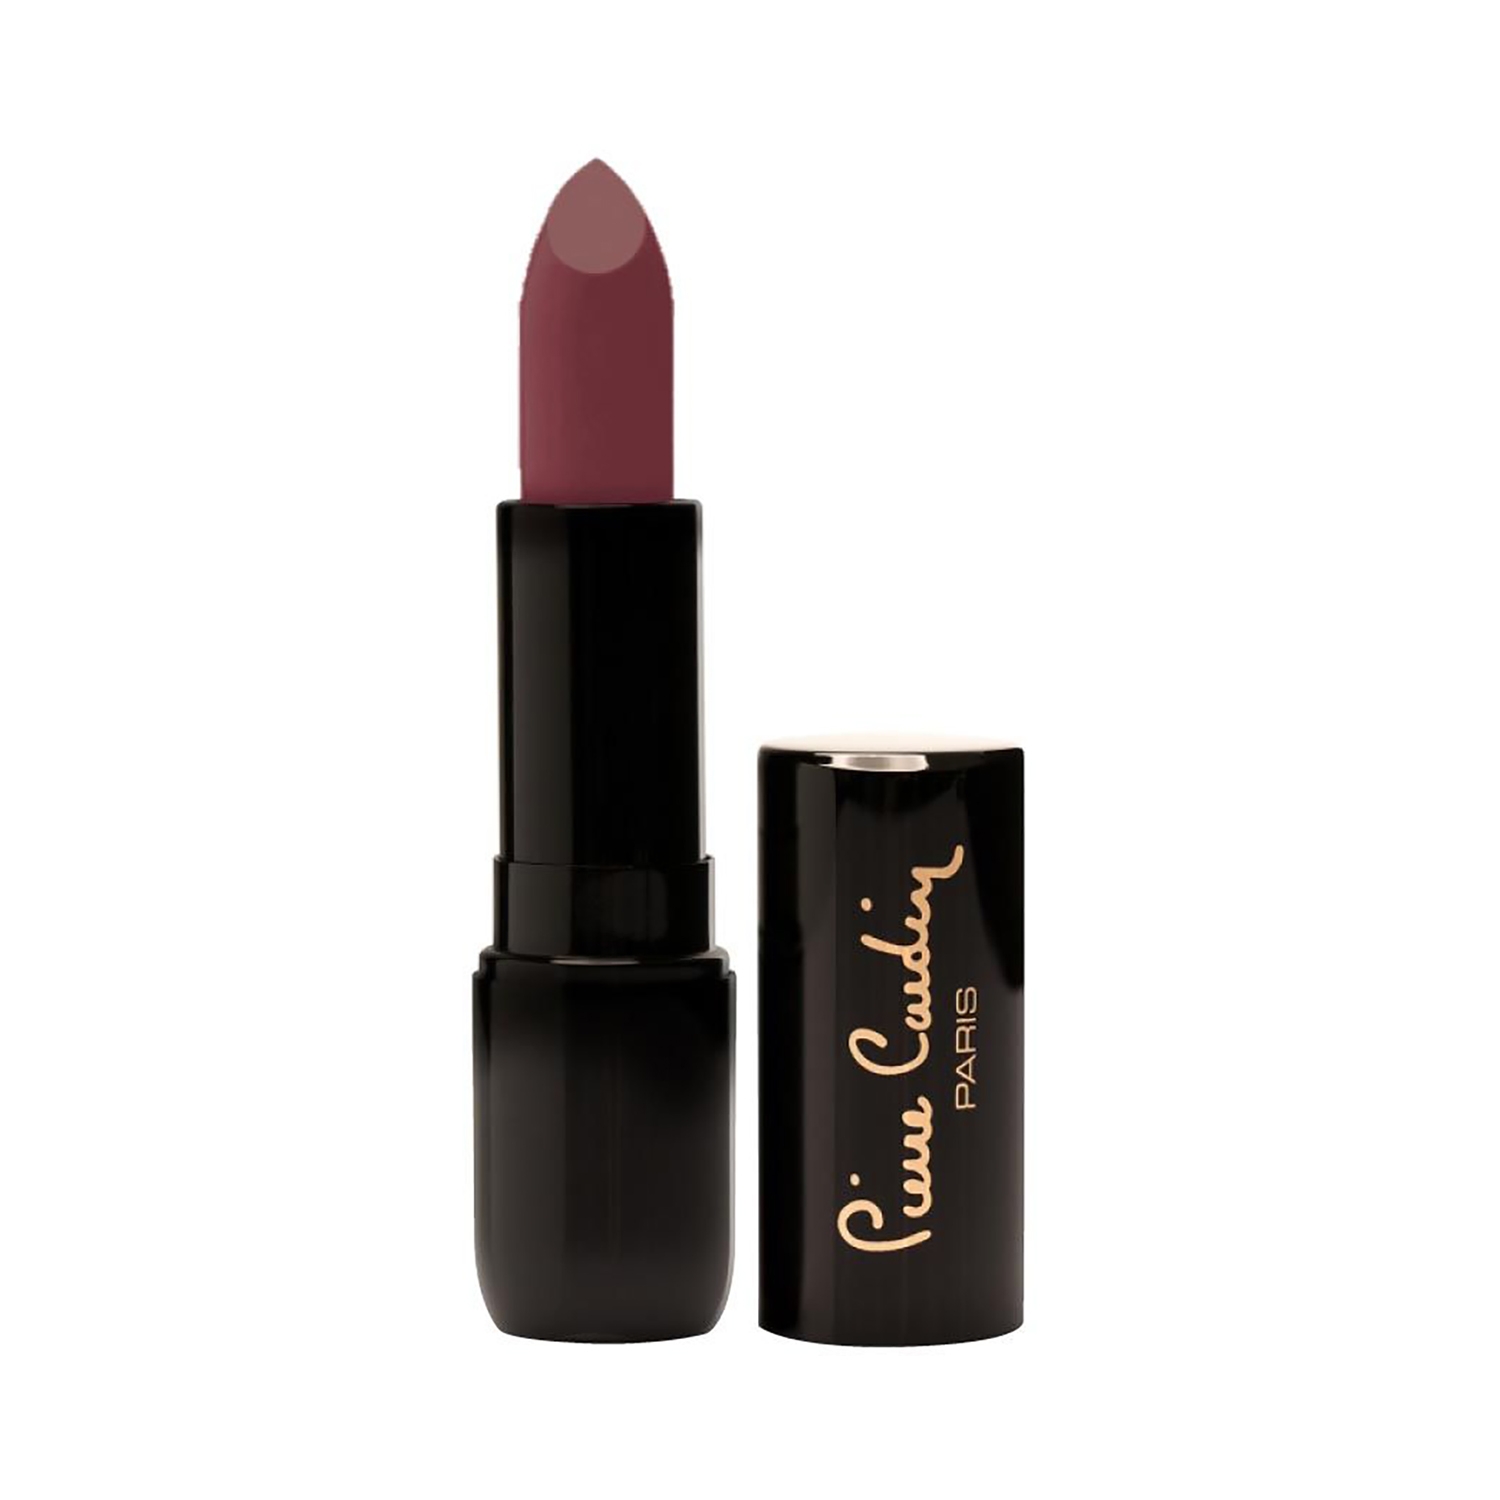 Pierre Cardin Paris | Pierre Cardin Paris Porcelain Edition Rouge Lipstick - 246 Rich Berry (4g)